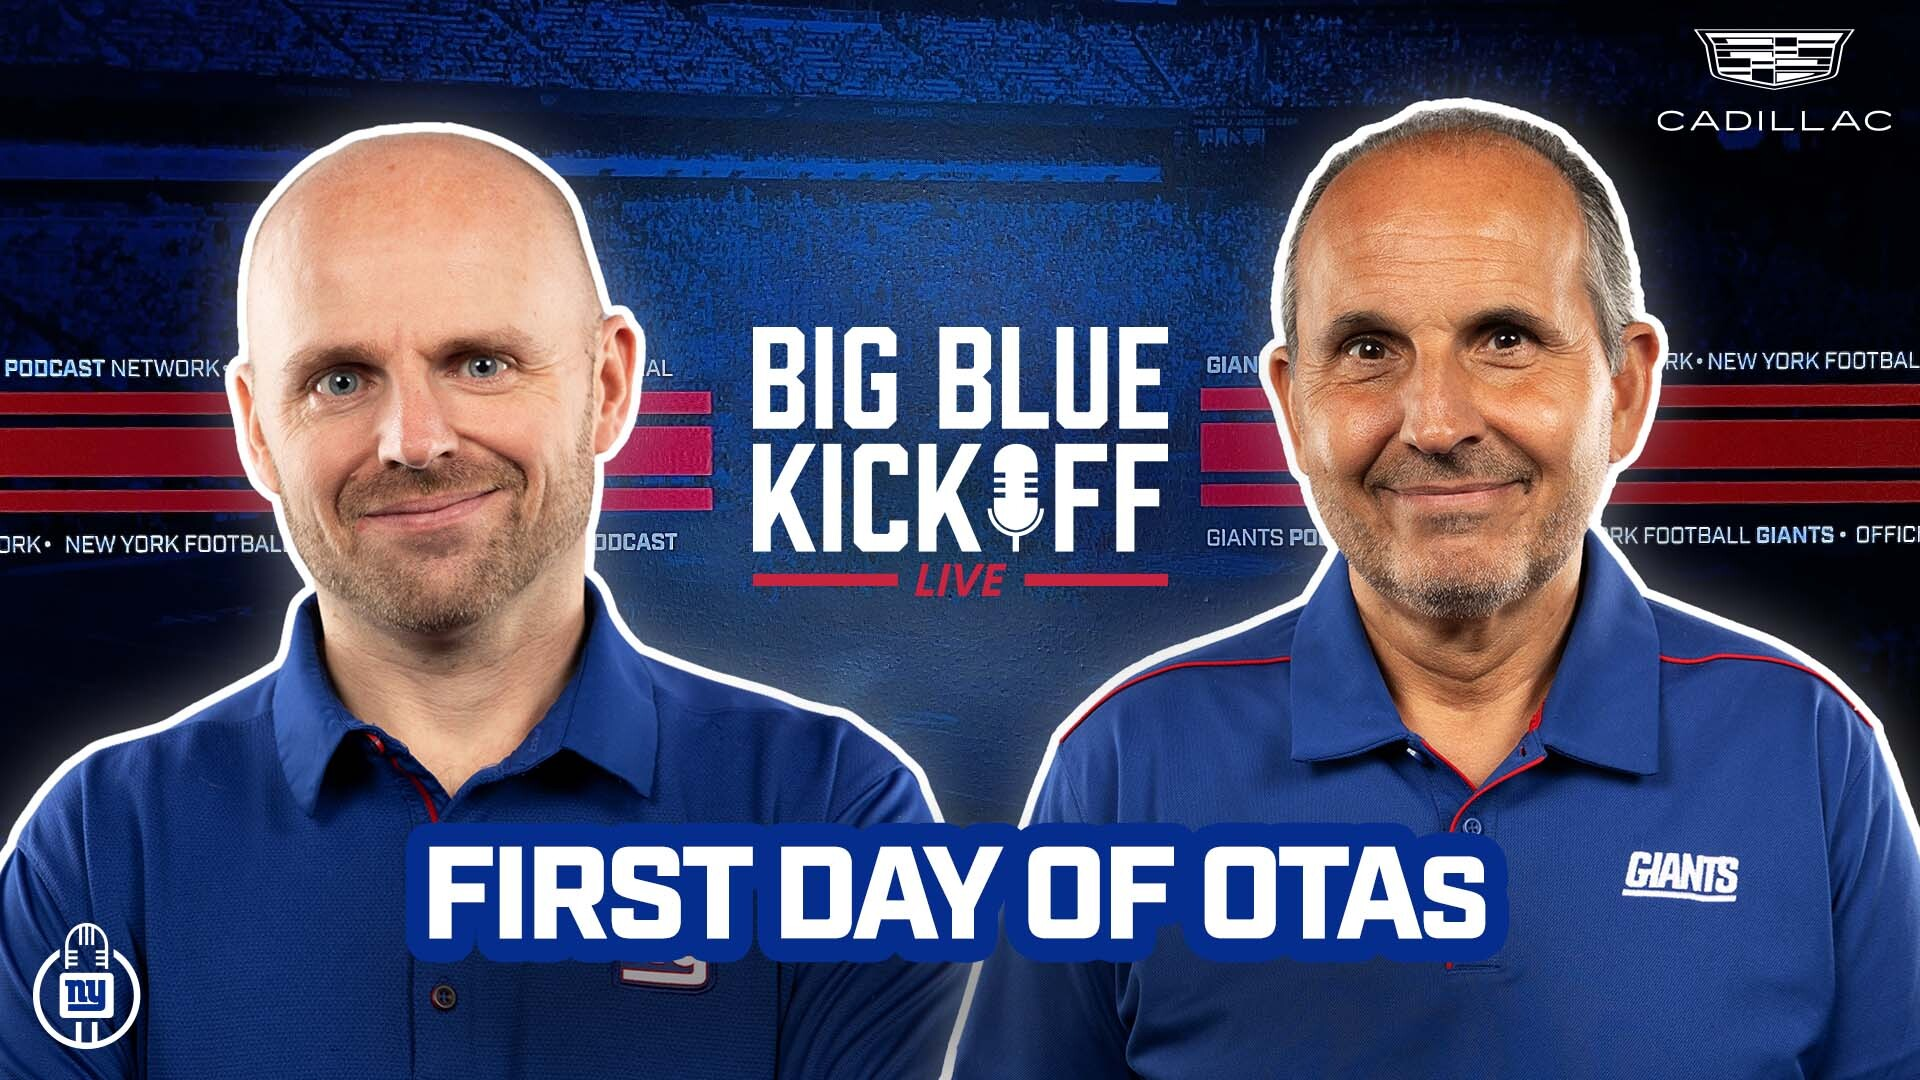 Big Blue Kickoff Live 5/20 | First Day of OTAs